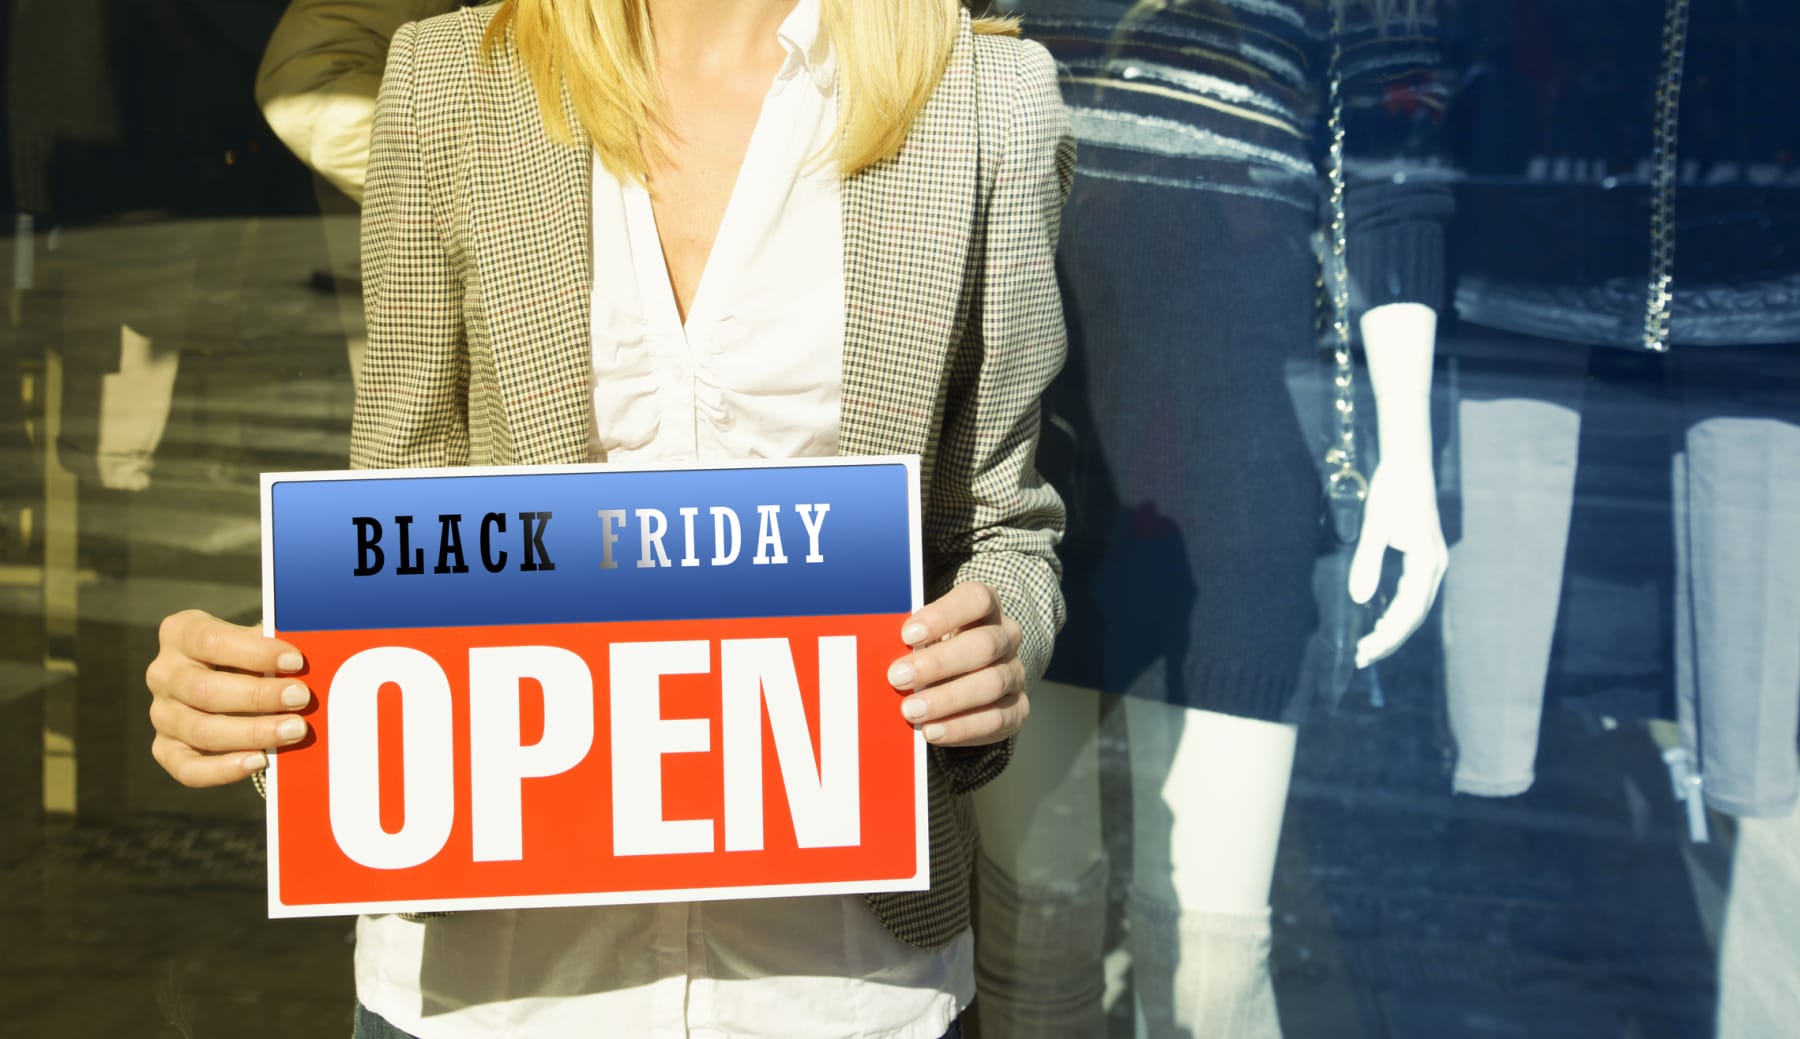 Woman holds Black Friday Open sign.